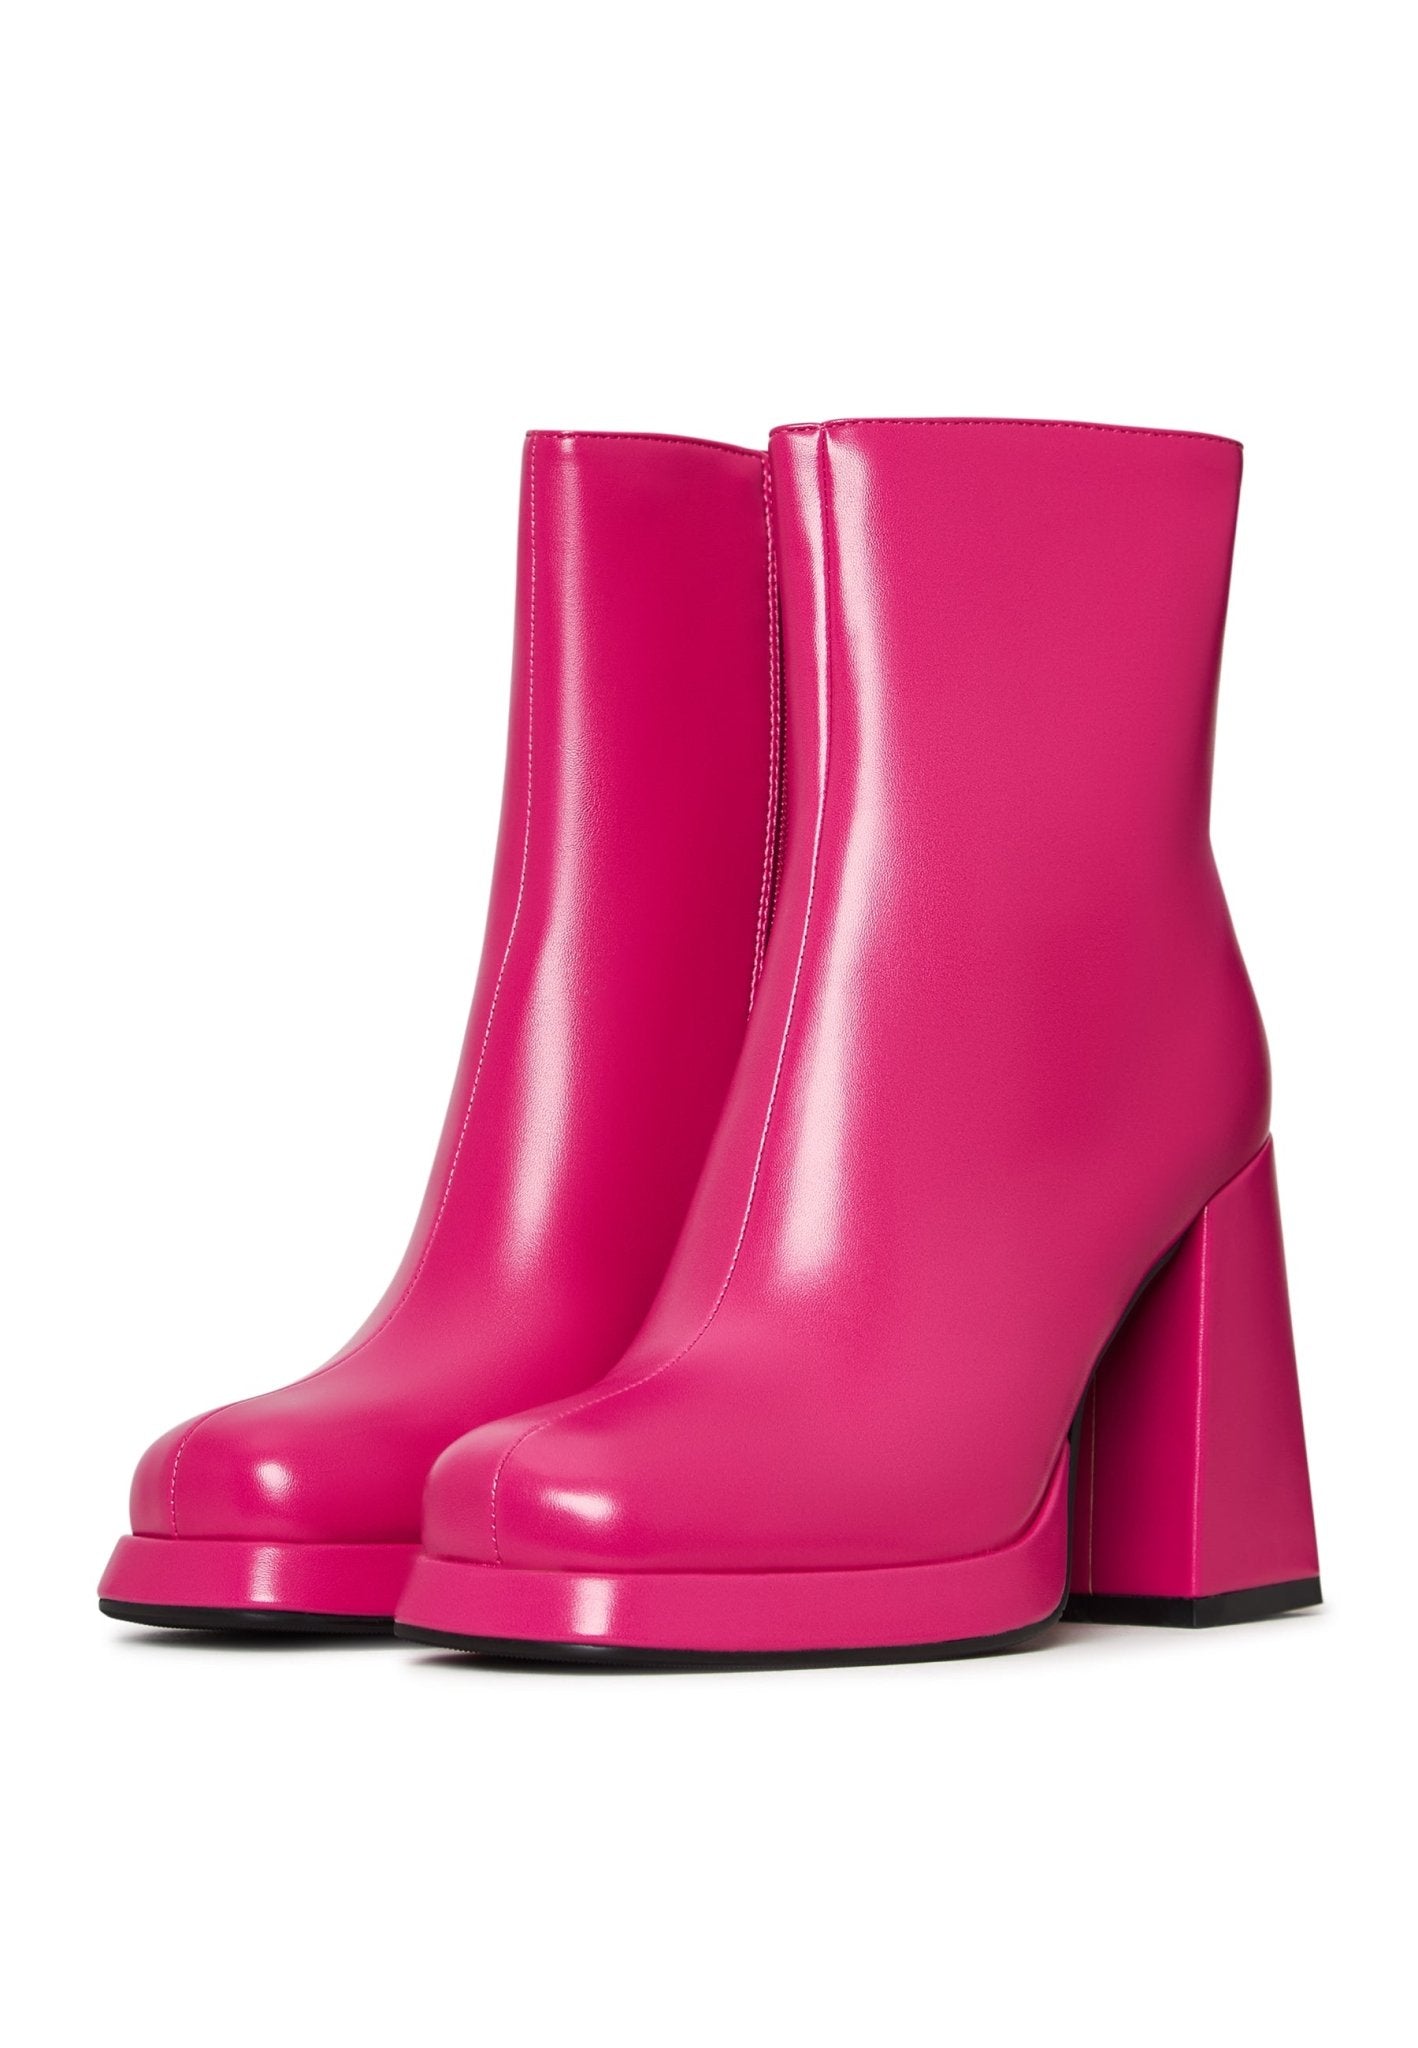 Dezsed Women Chunky Mid Heel Ankle Boots Clearance Women's Oversized  Colorblock Patent Leather Boots with Block Heel Zipper Booties Hot Pink -  Walmart.com